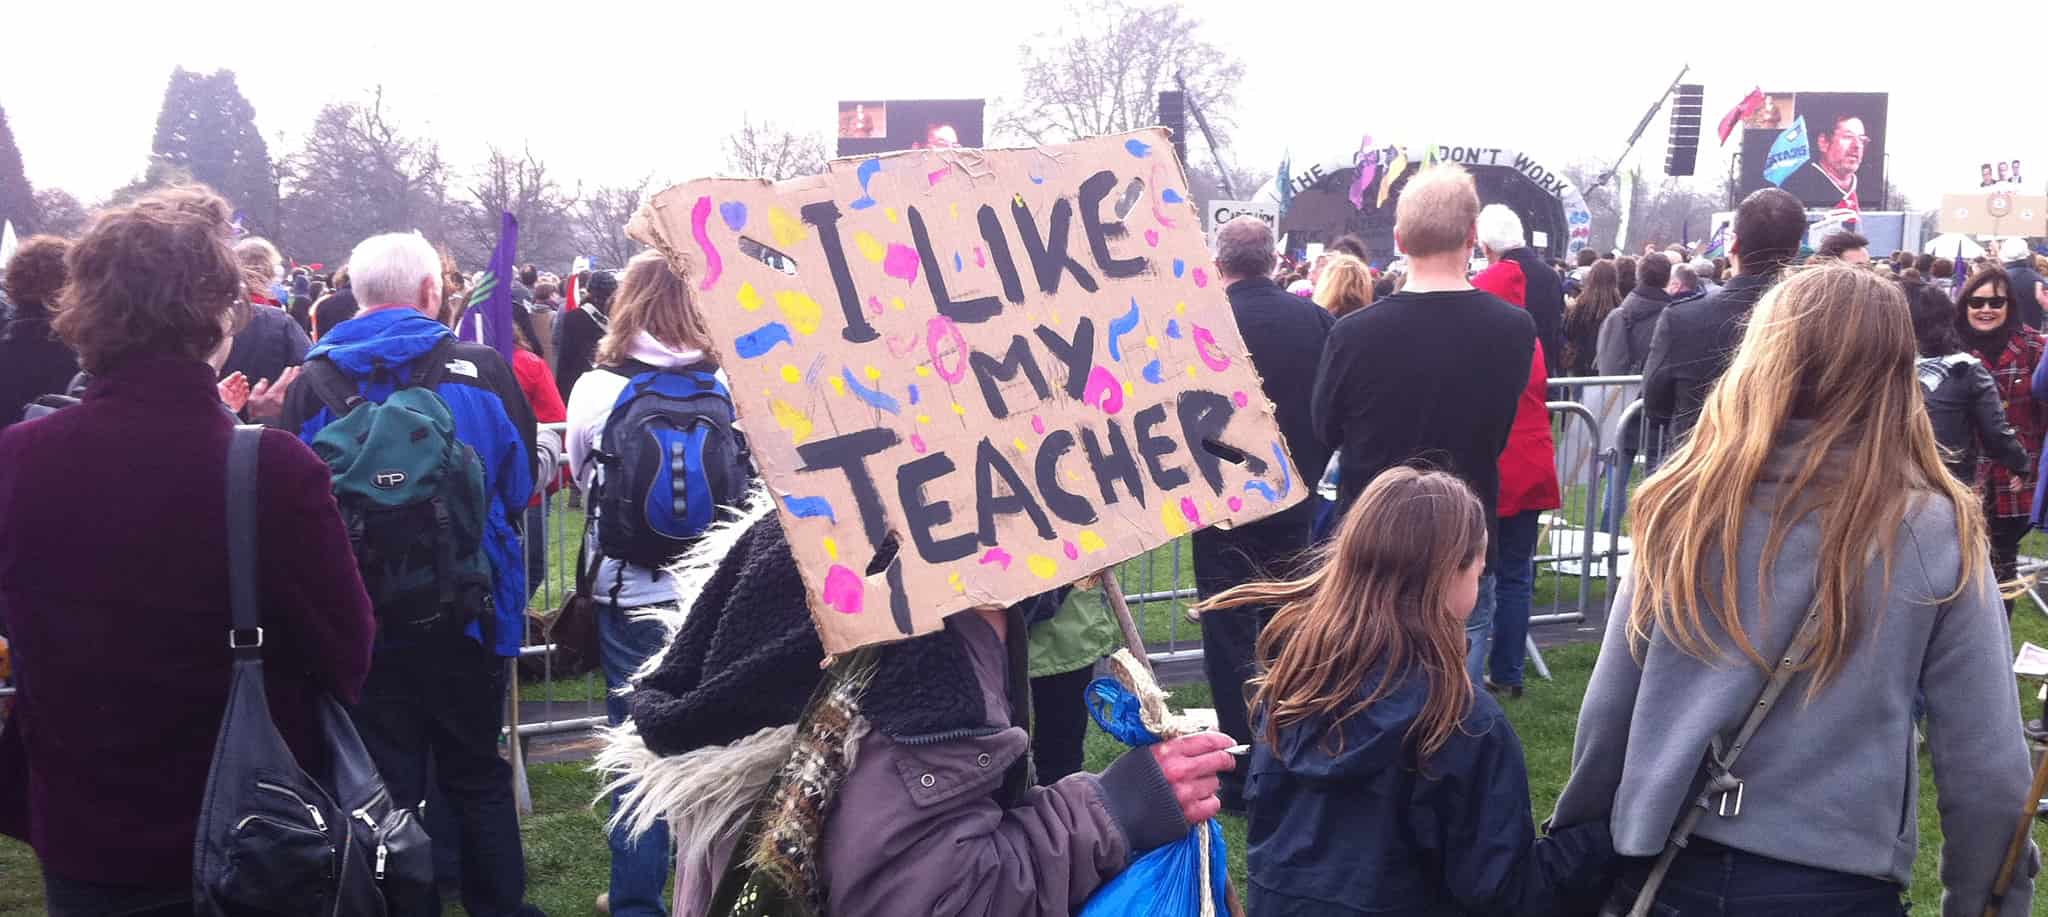 'I like my teacher' banner being held by young person in crowd at rally